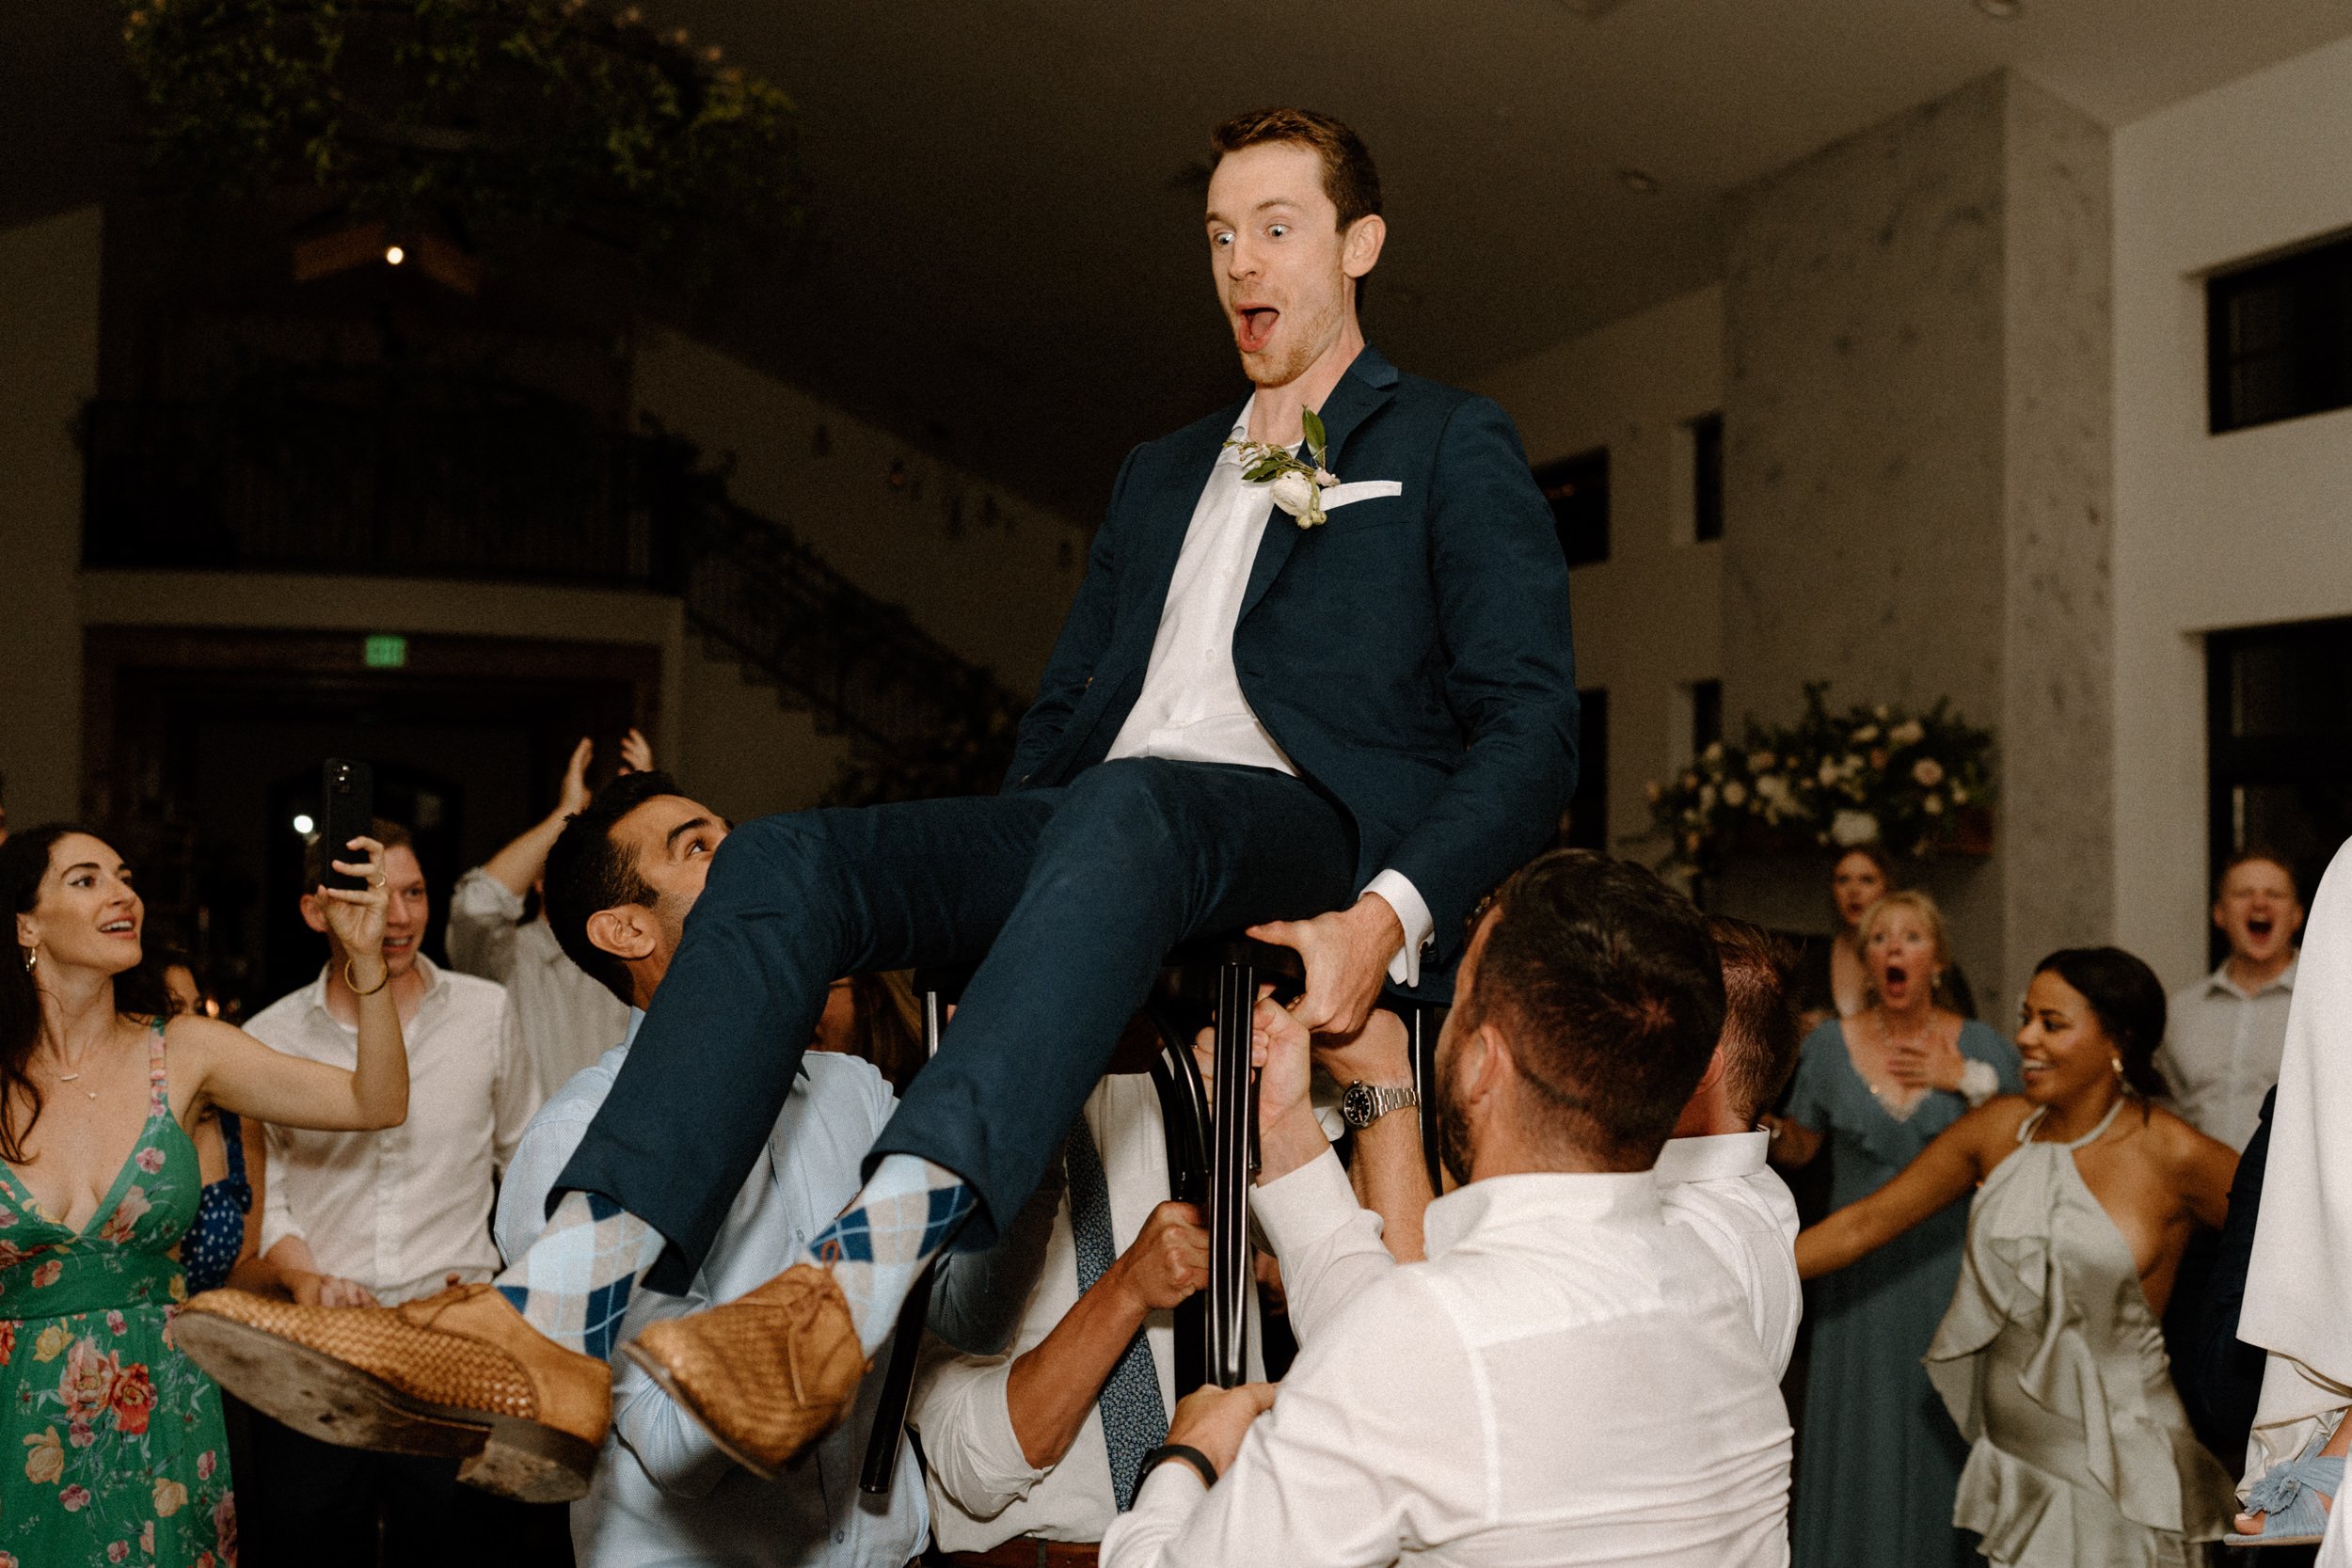 The wedding guests lift the groom in a chair